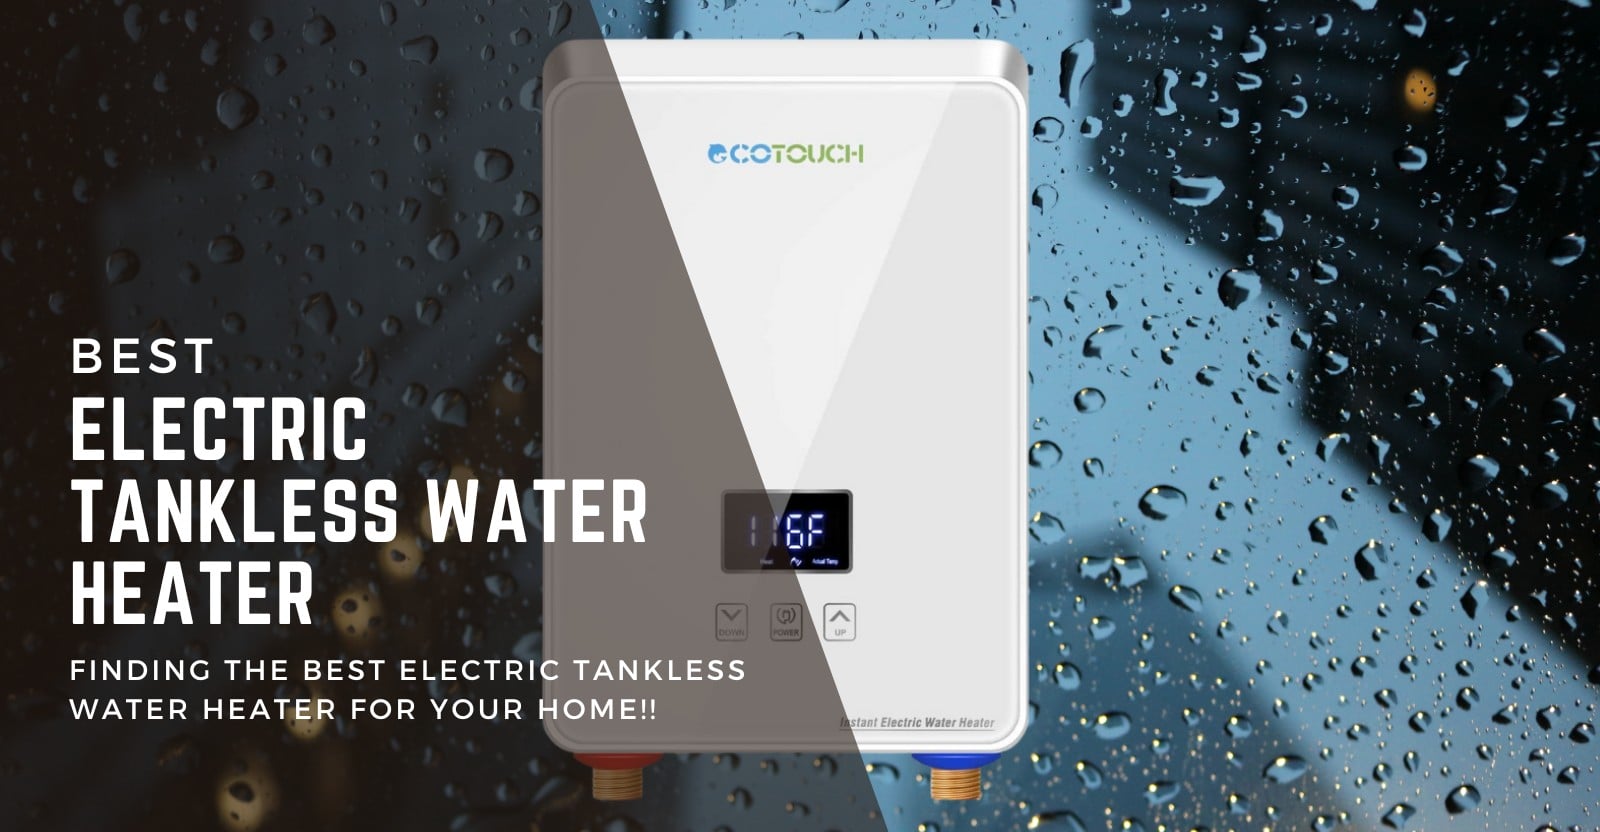 Best Electric Tankless Water Heater Review